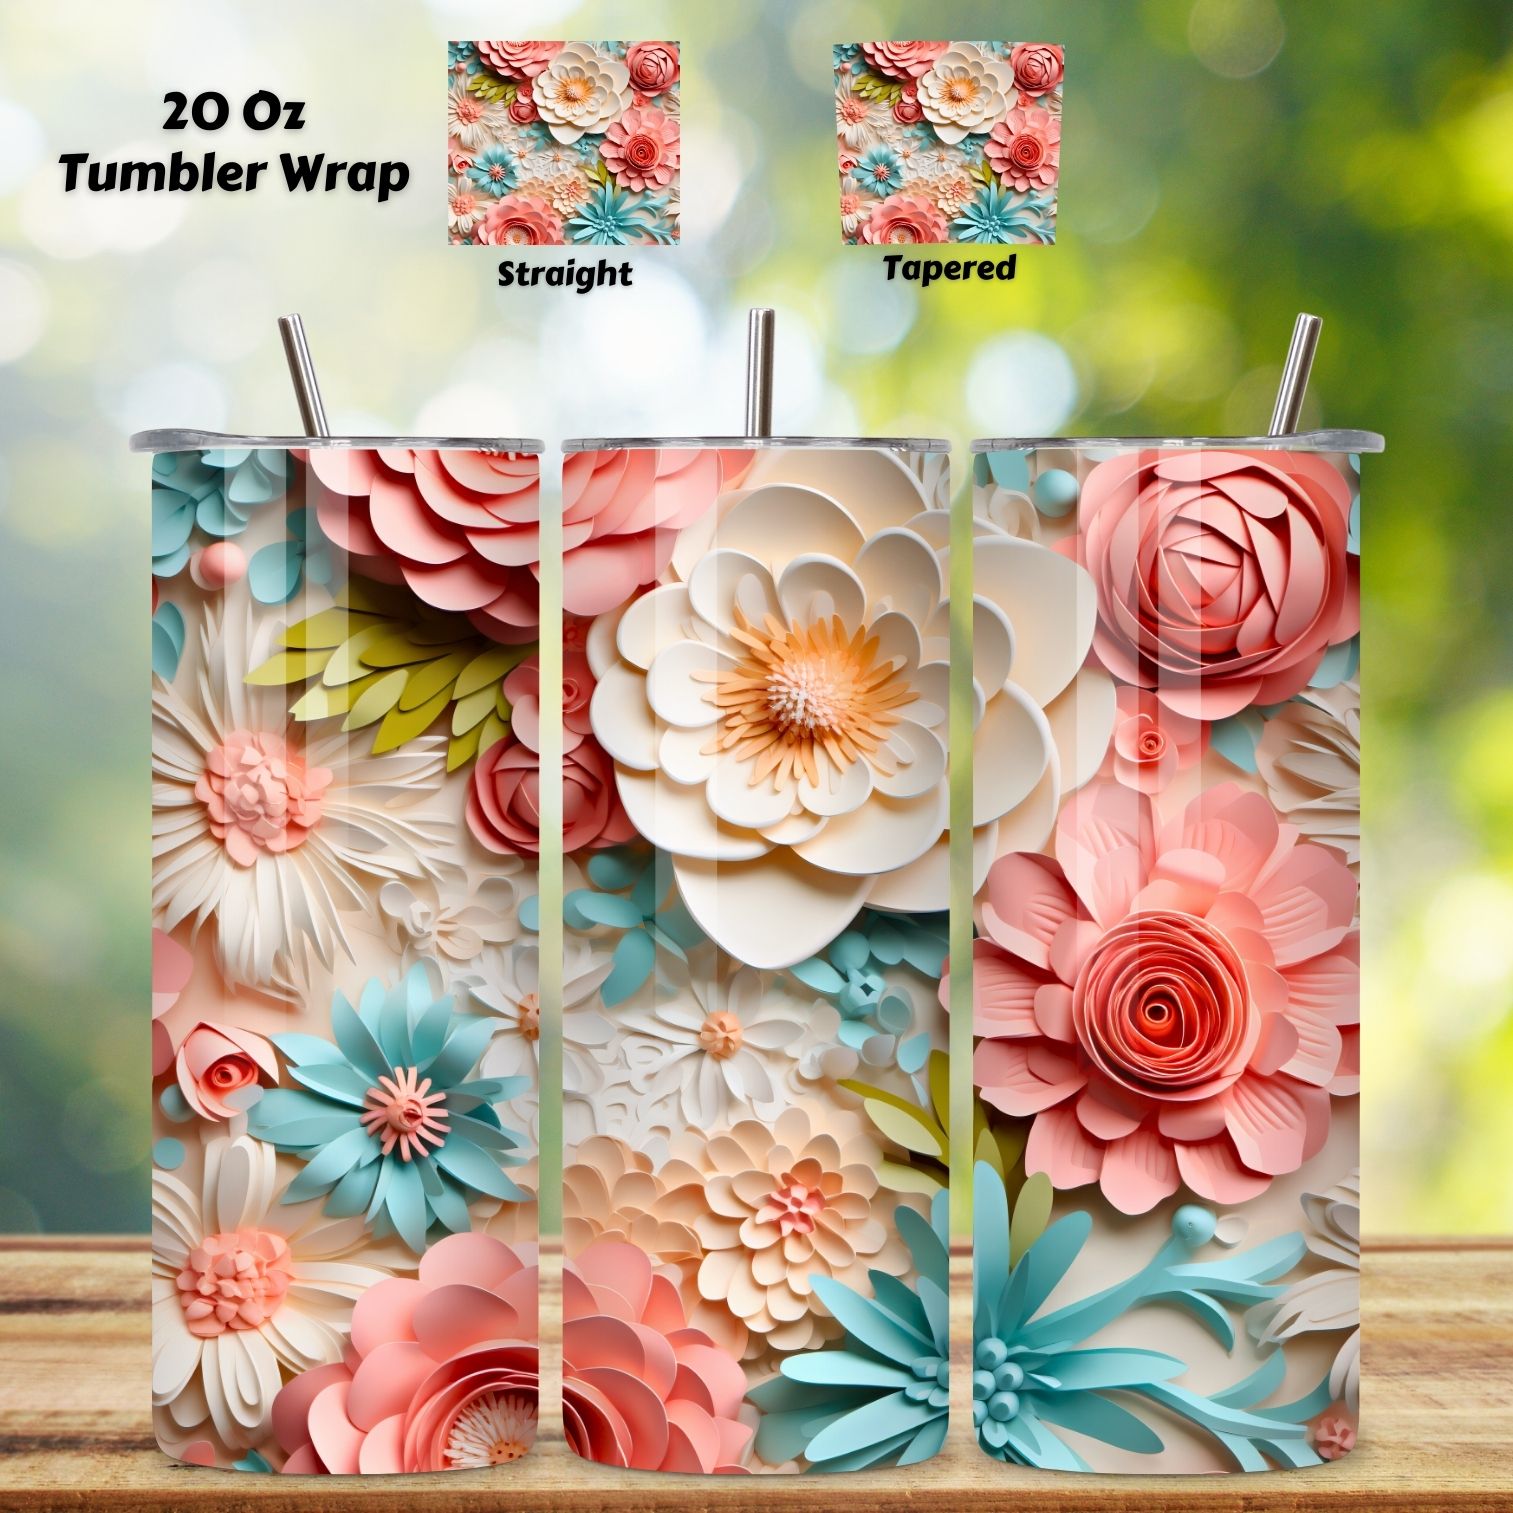 3D Pastel Flowers 20 oz Skinny Tumbler Sublimation Design, Straight And Tapered Tumbler Wrap, Instant Digital Download PNG cover image.